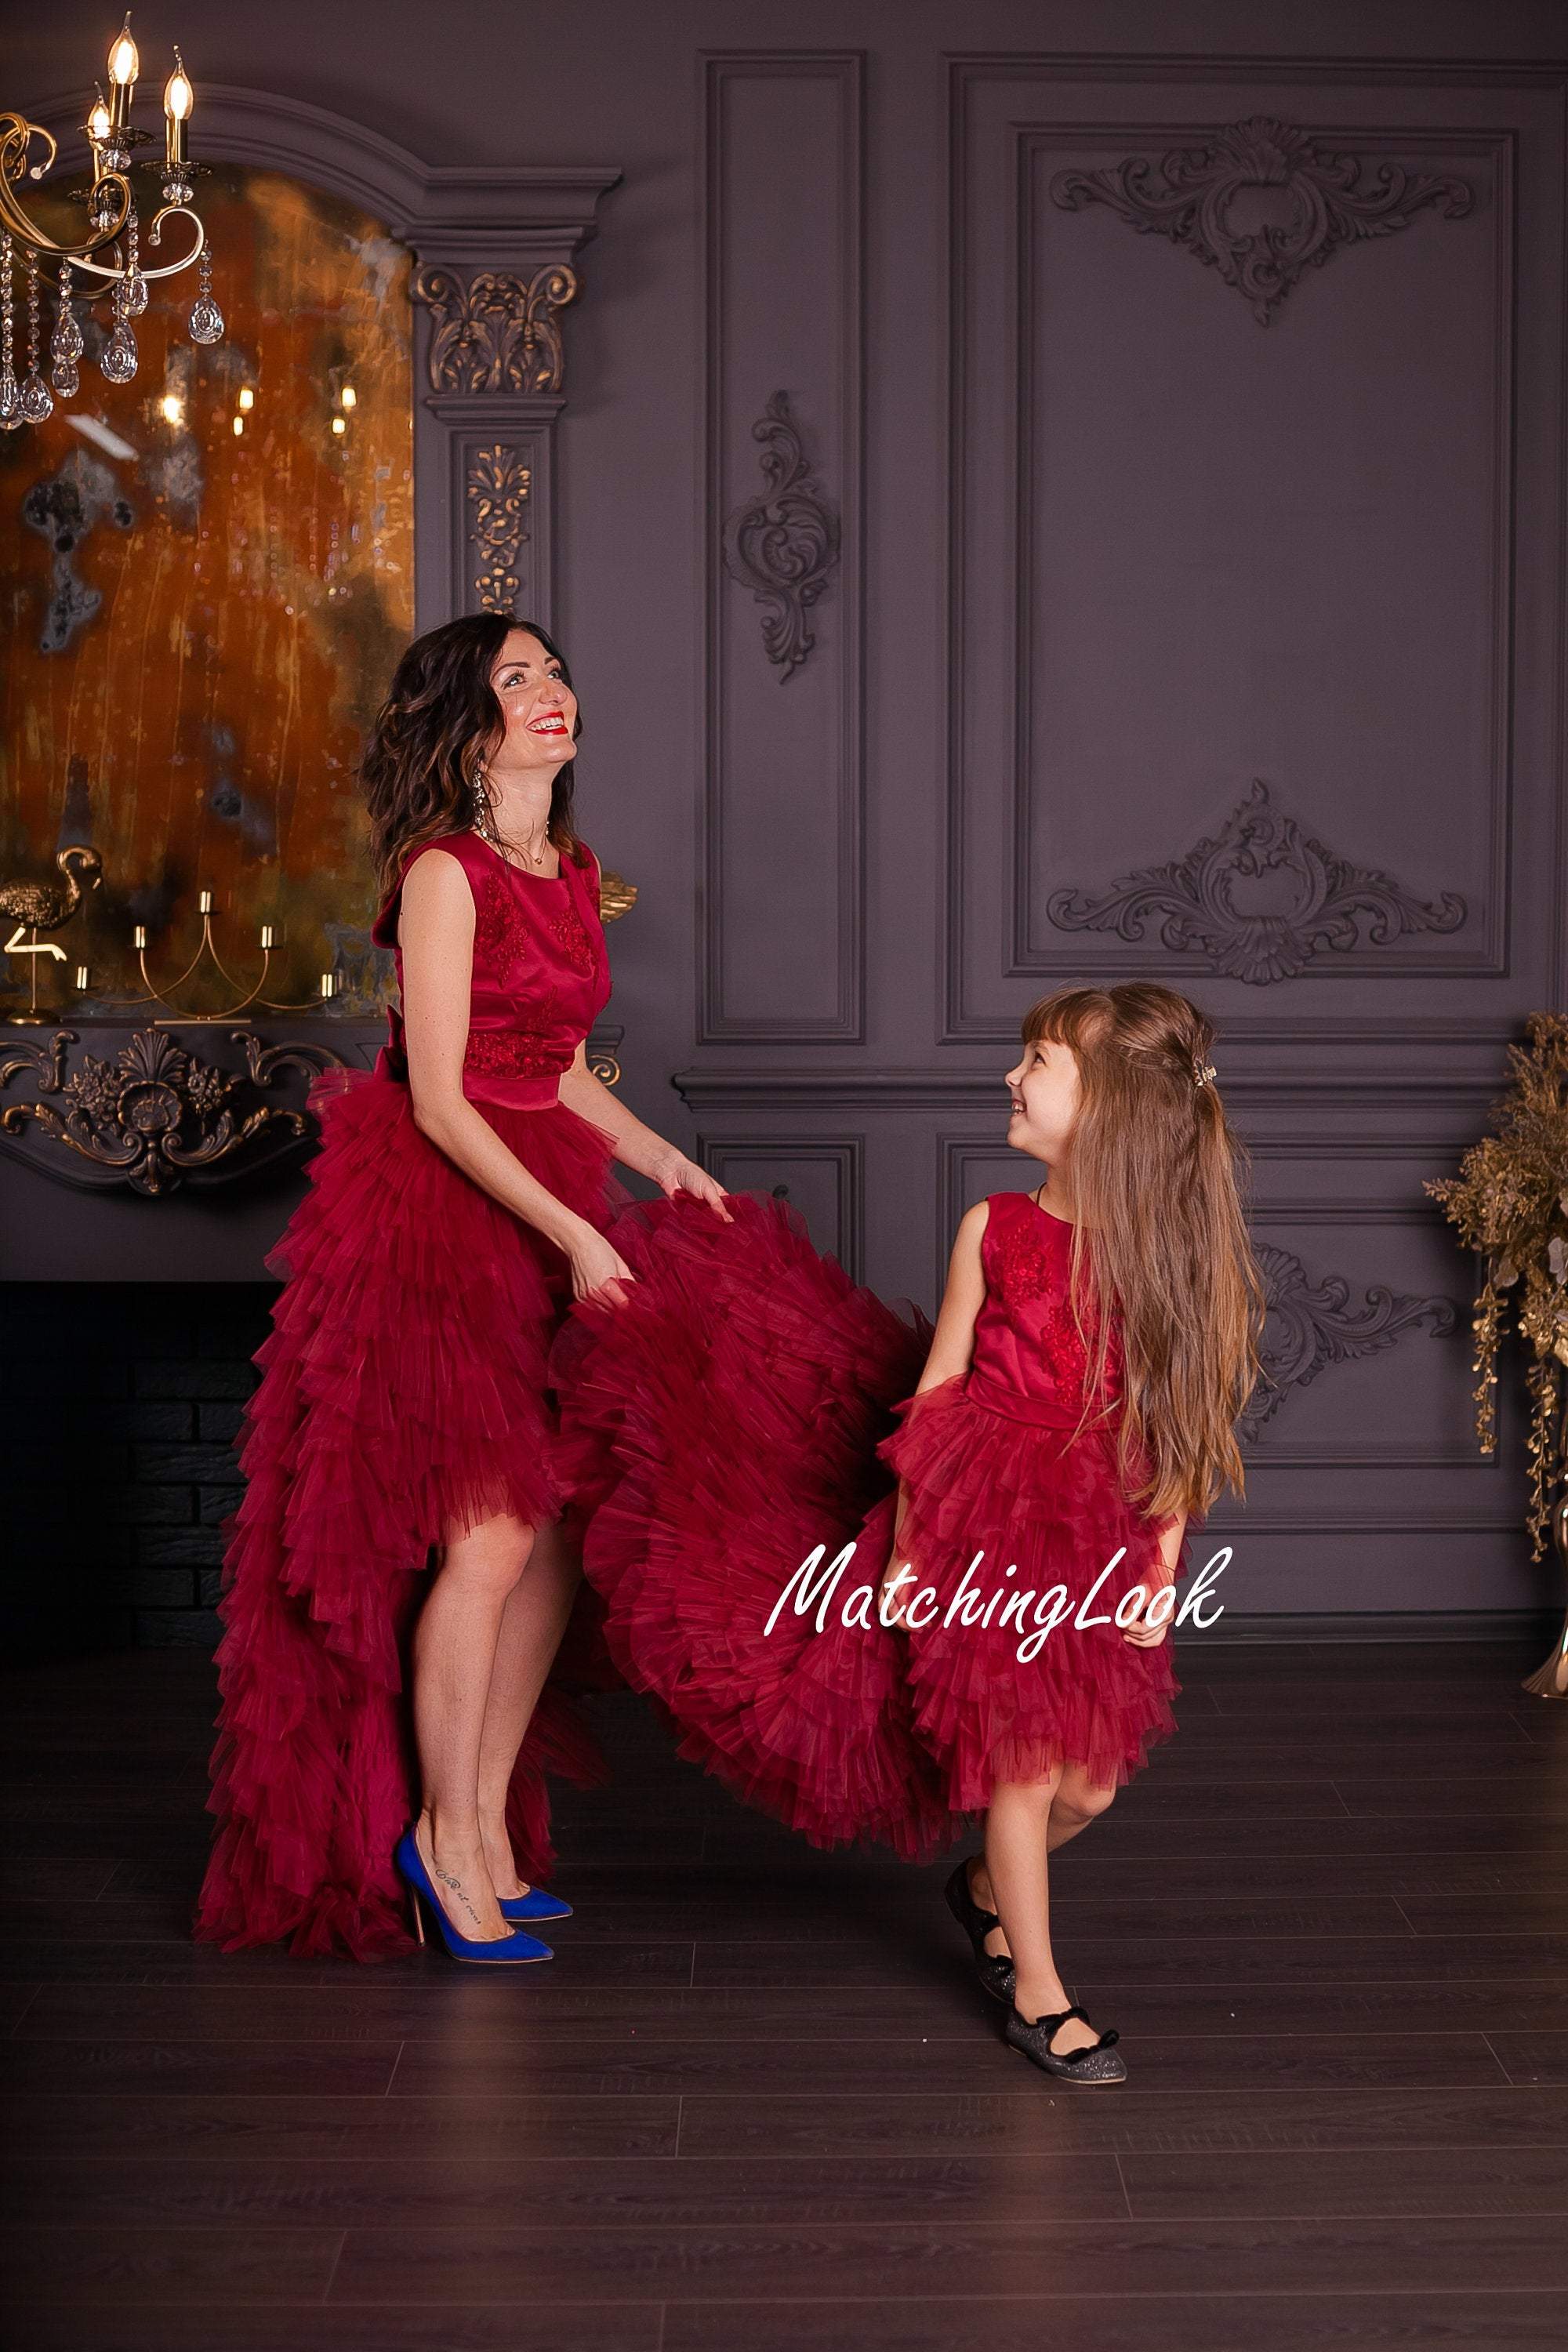 Matchinglook M Size Dark Red Tulle Evening Dress - Christmas Dark Red Photoshoot Dress - Hi Low Ruffle Tulle Dress for Christmas Party 8